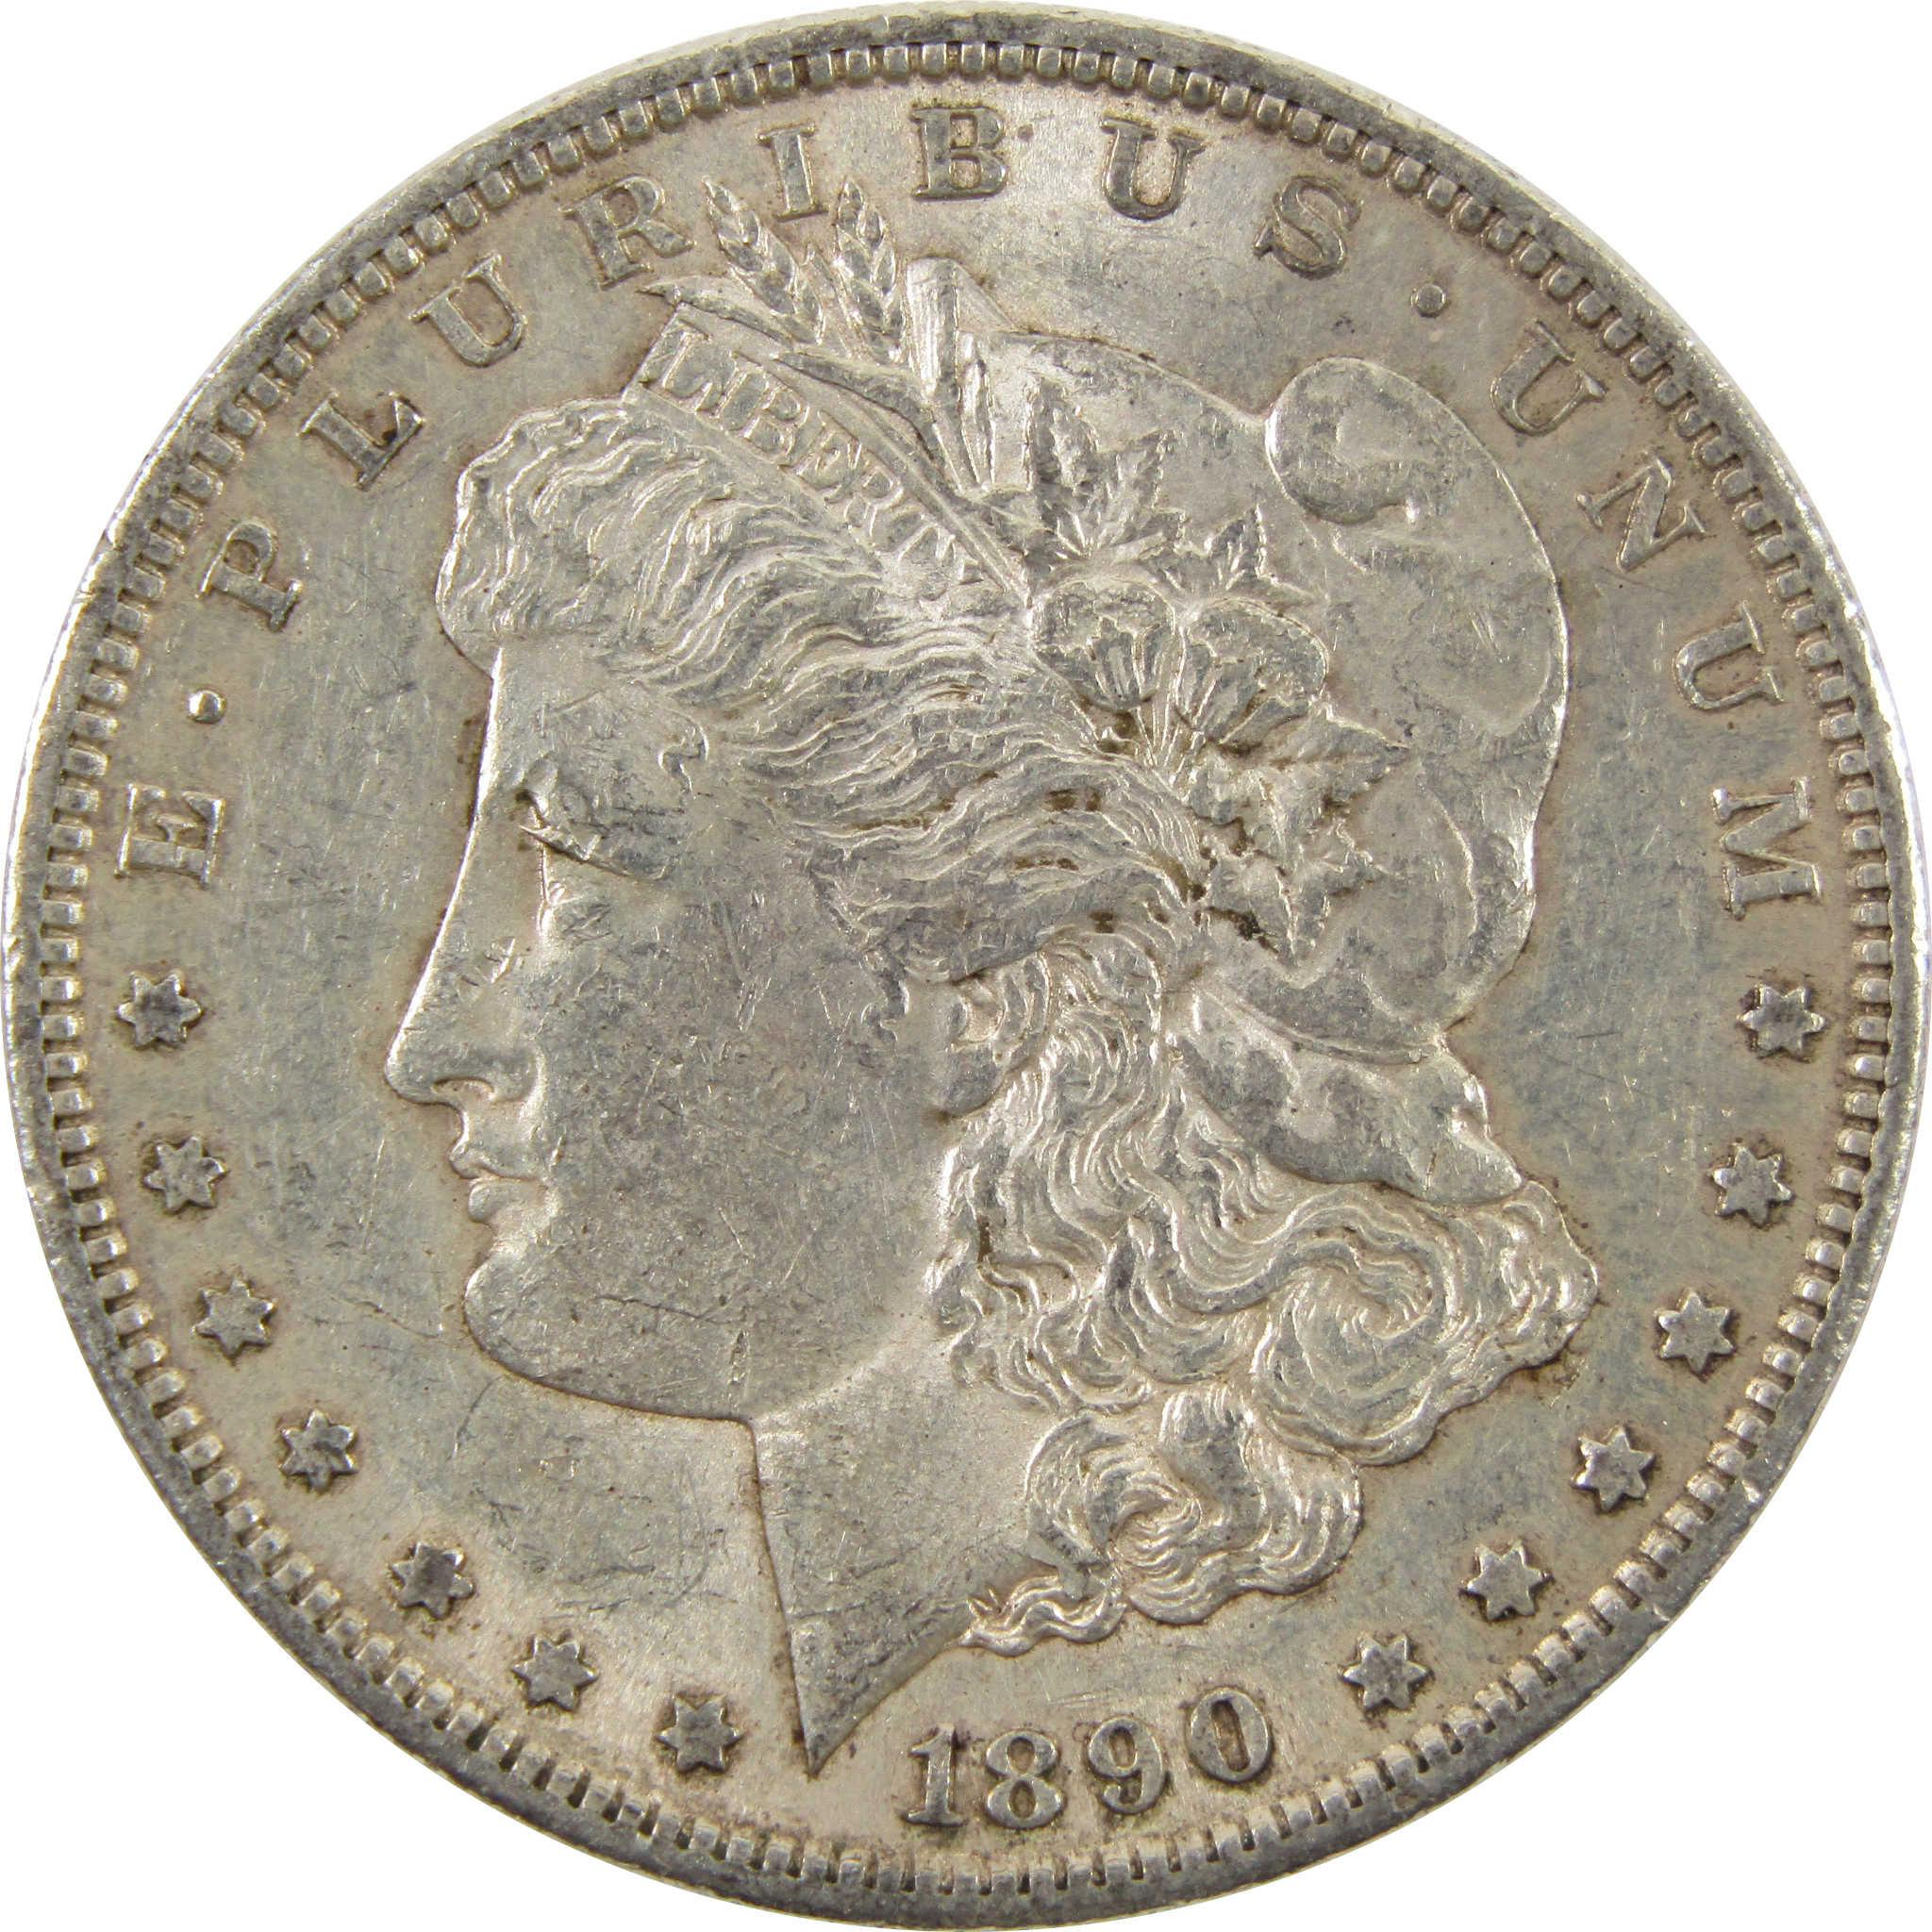 1890 S Morgan Dollar AU About Uncirculated 90% Silver $1 SKU:I10623 - Morgan coin - Morgan silver dollar - Morgan silver dollar for sale - Profile Coins &amp; Collectibles